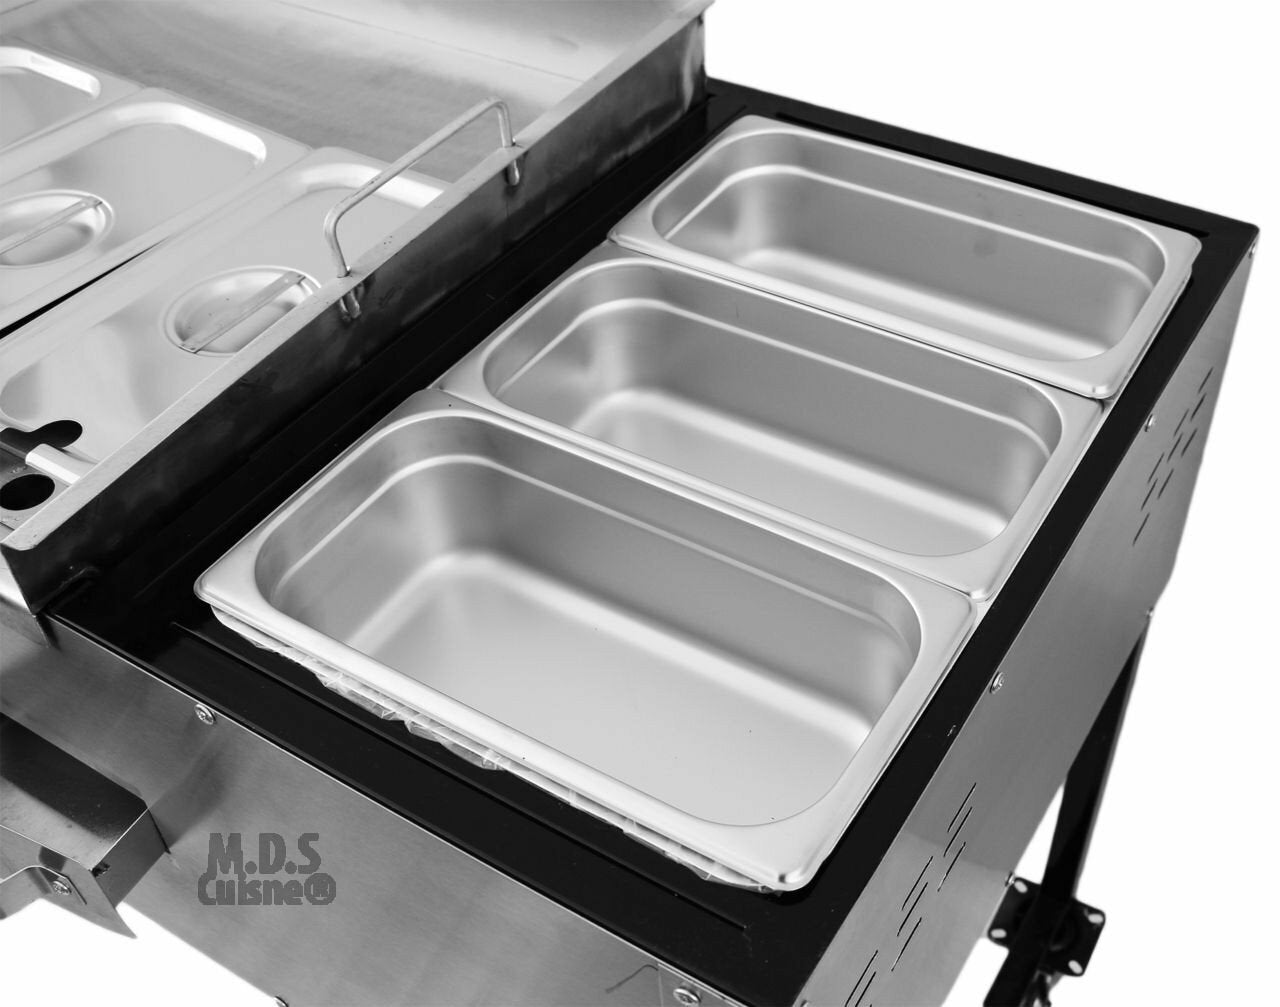 Stainless Steel Taco Cart With 3 Warmer Chafer